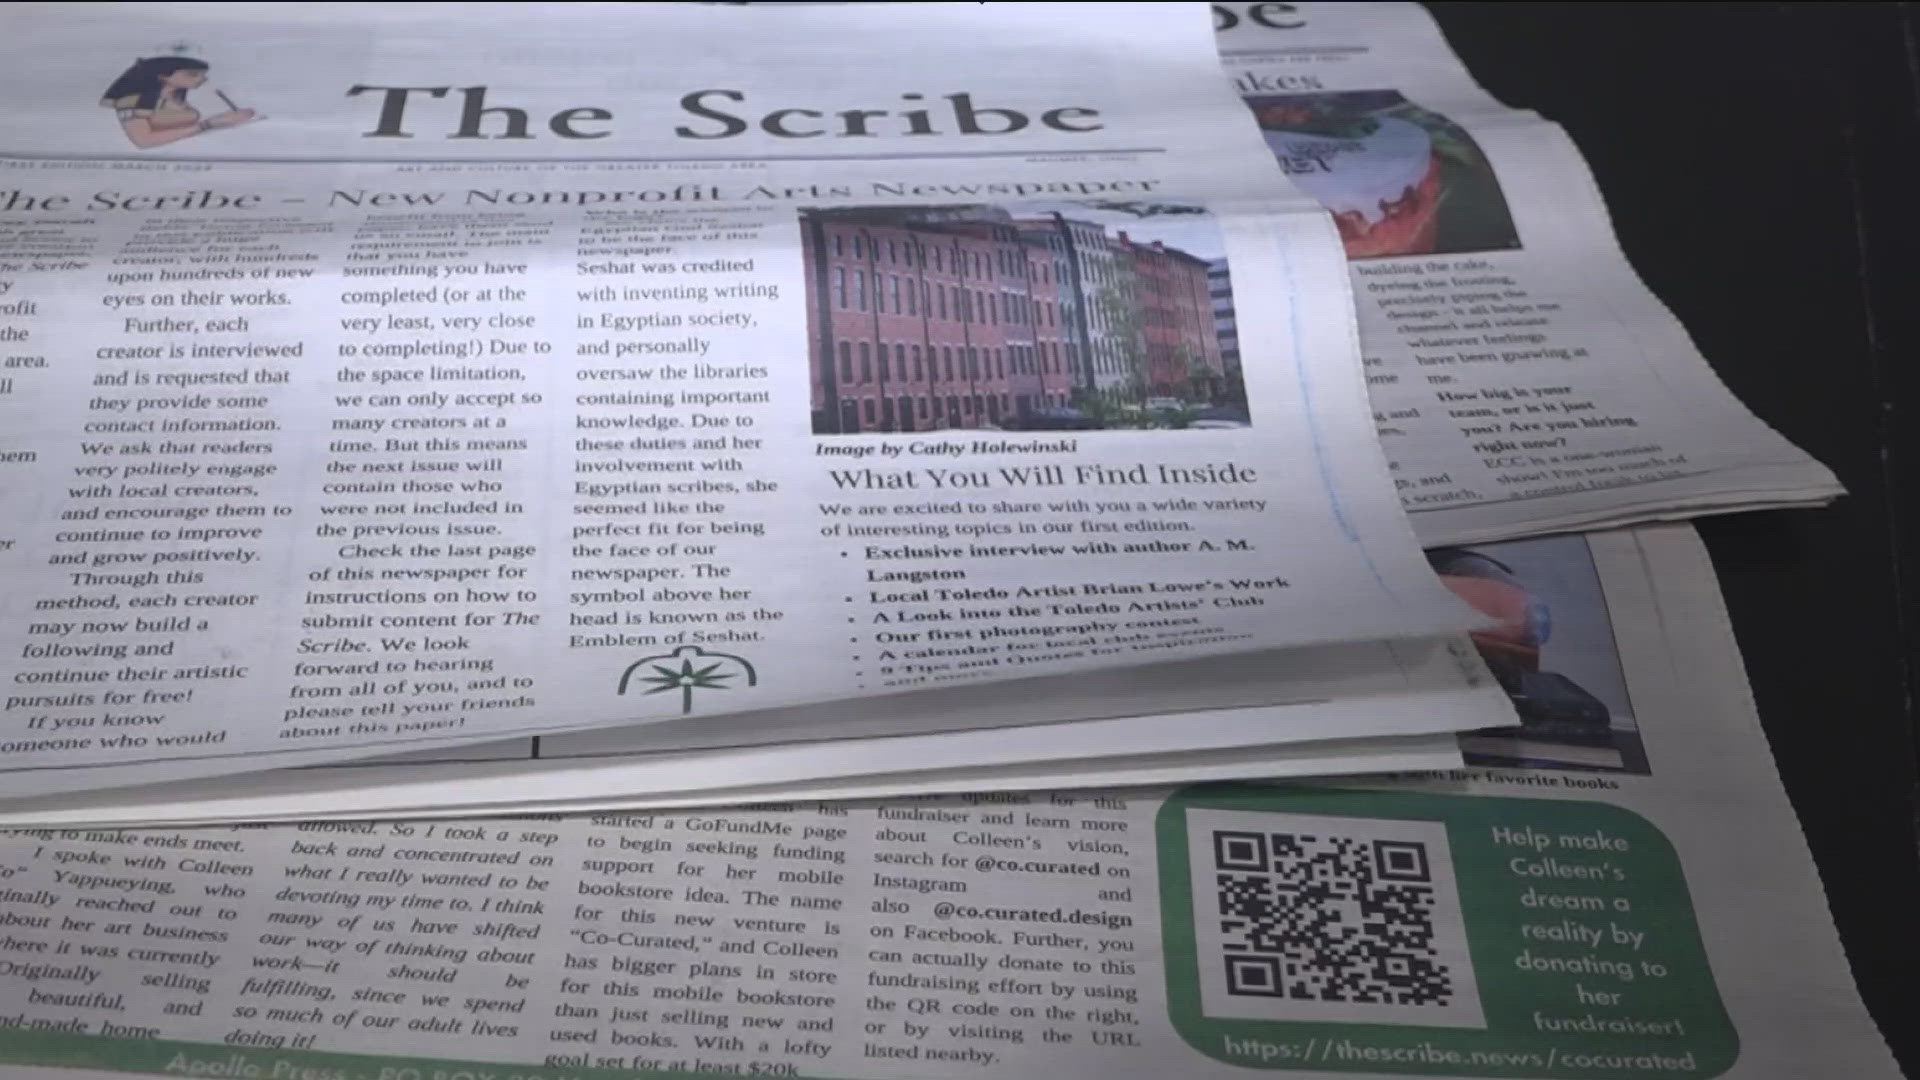 The Scribe is a new, nonprofit arts newspaper helping crafters of all kinds share their work with people in the community.